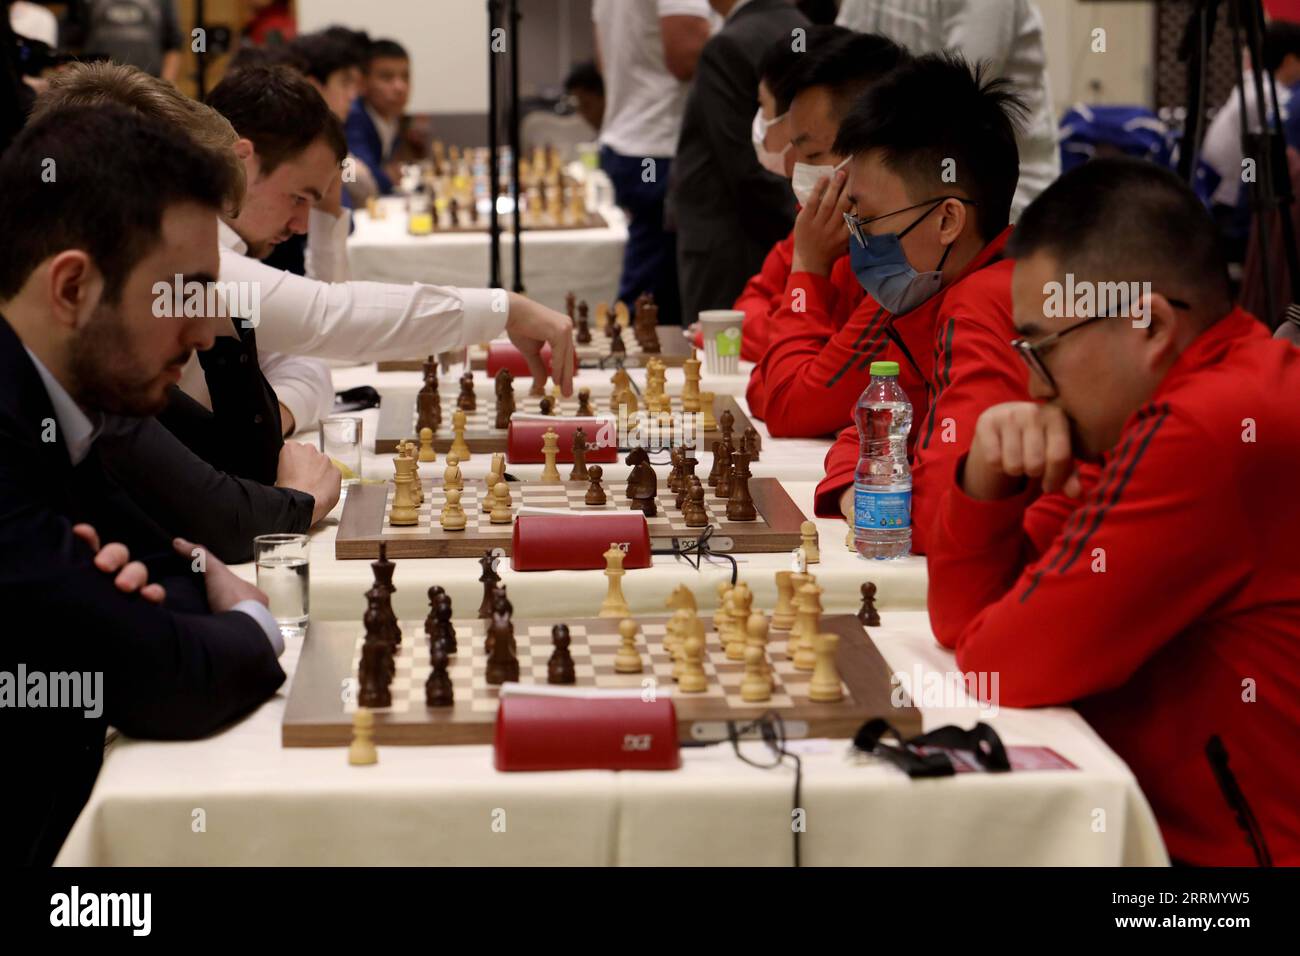 Kazakhstan Chess Federation: playing chess results in better brain function  - The Astana Times